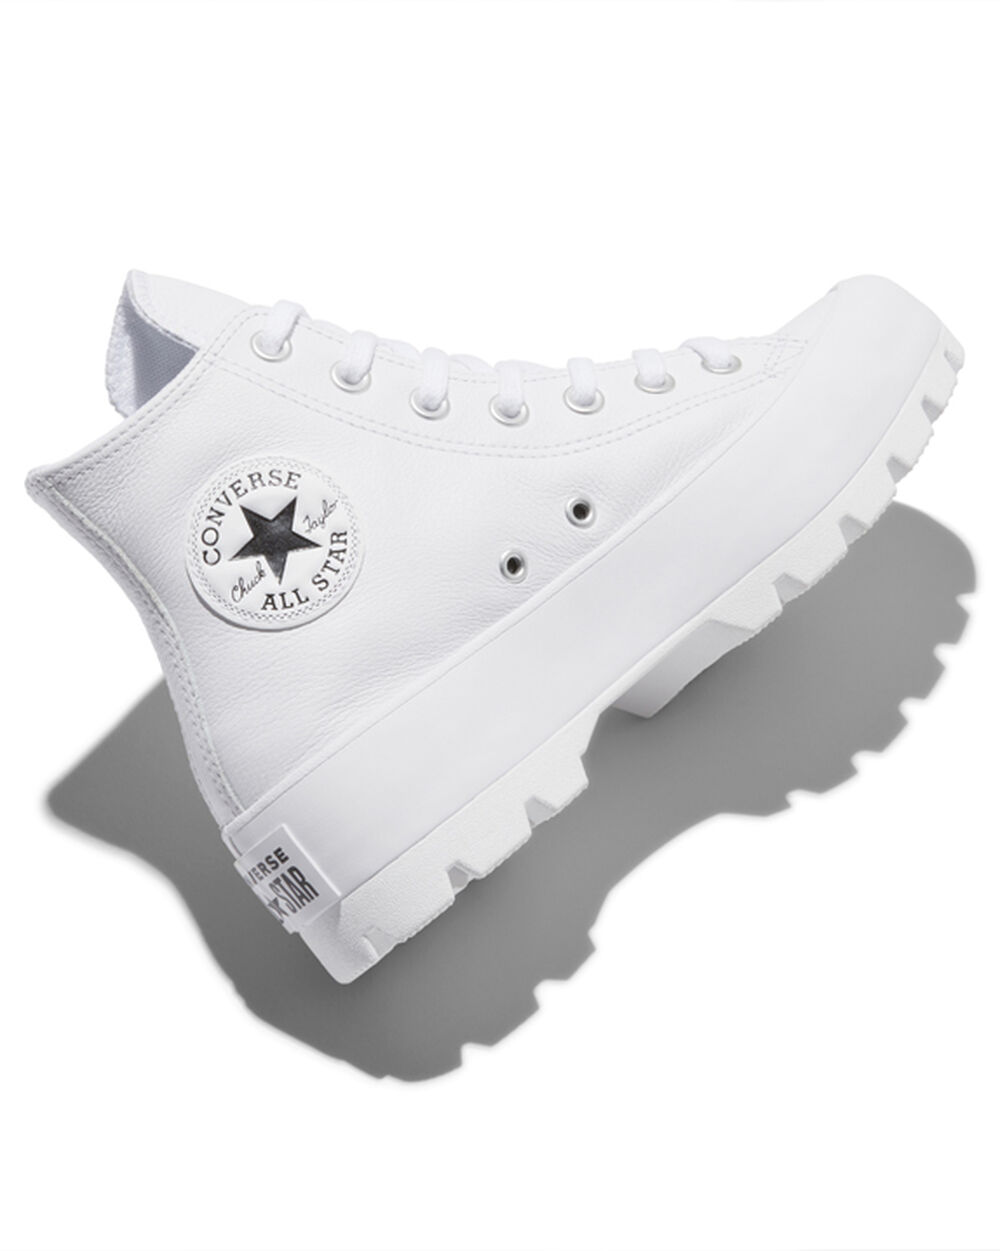 Tenis Converse Chuck Taylor All Star Mujer Negros Blancos | Mexico-517346